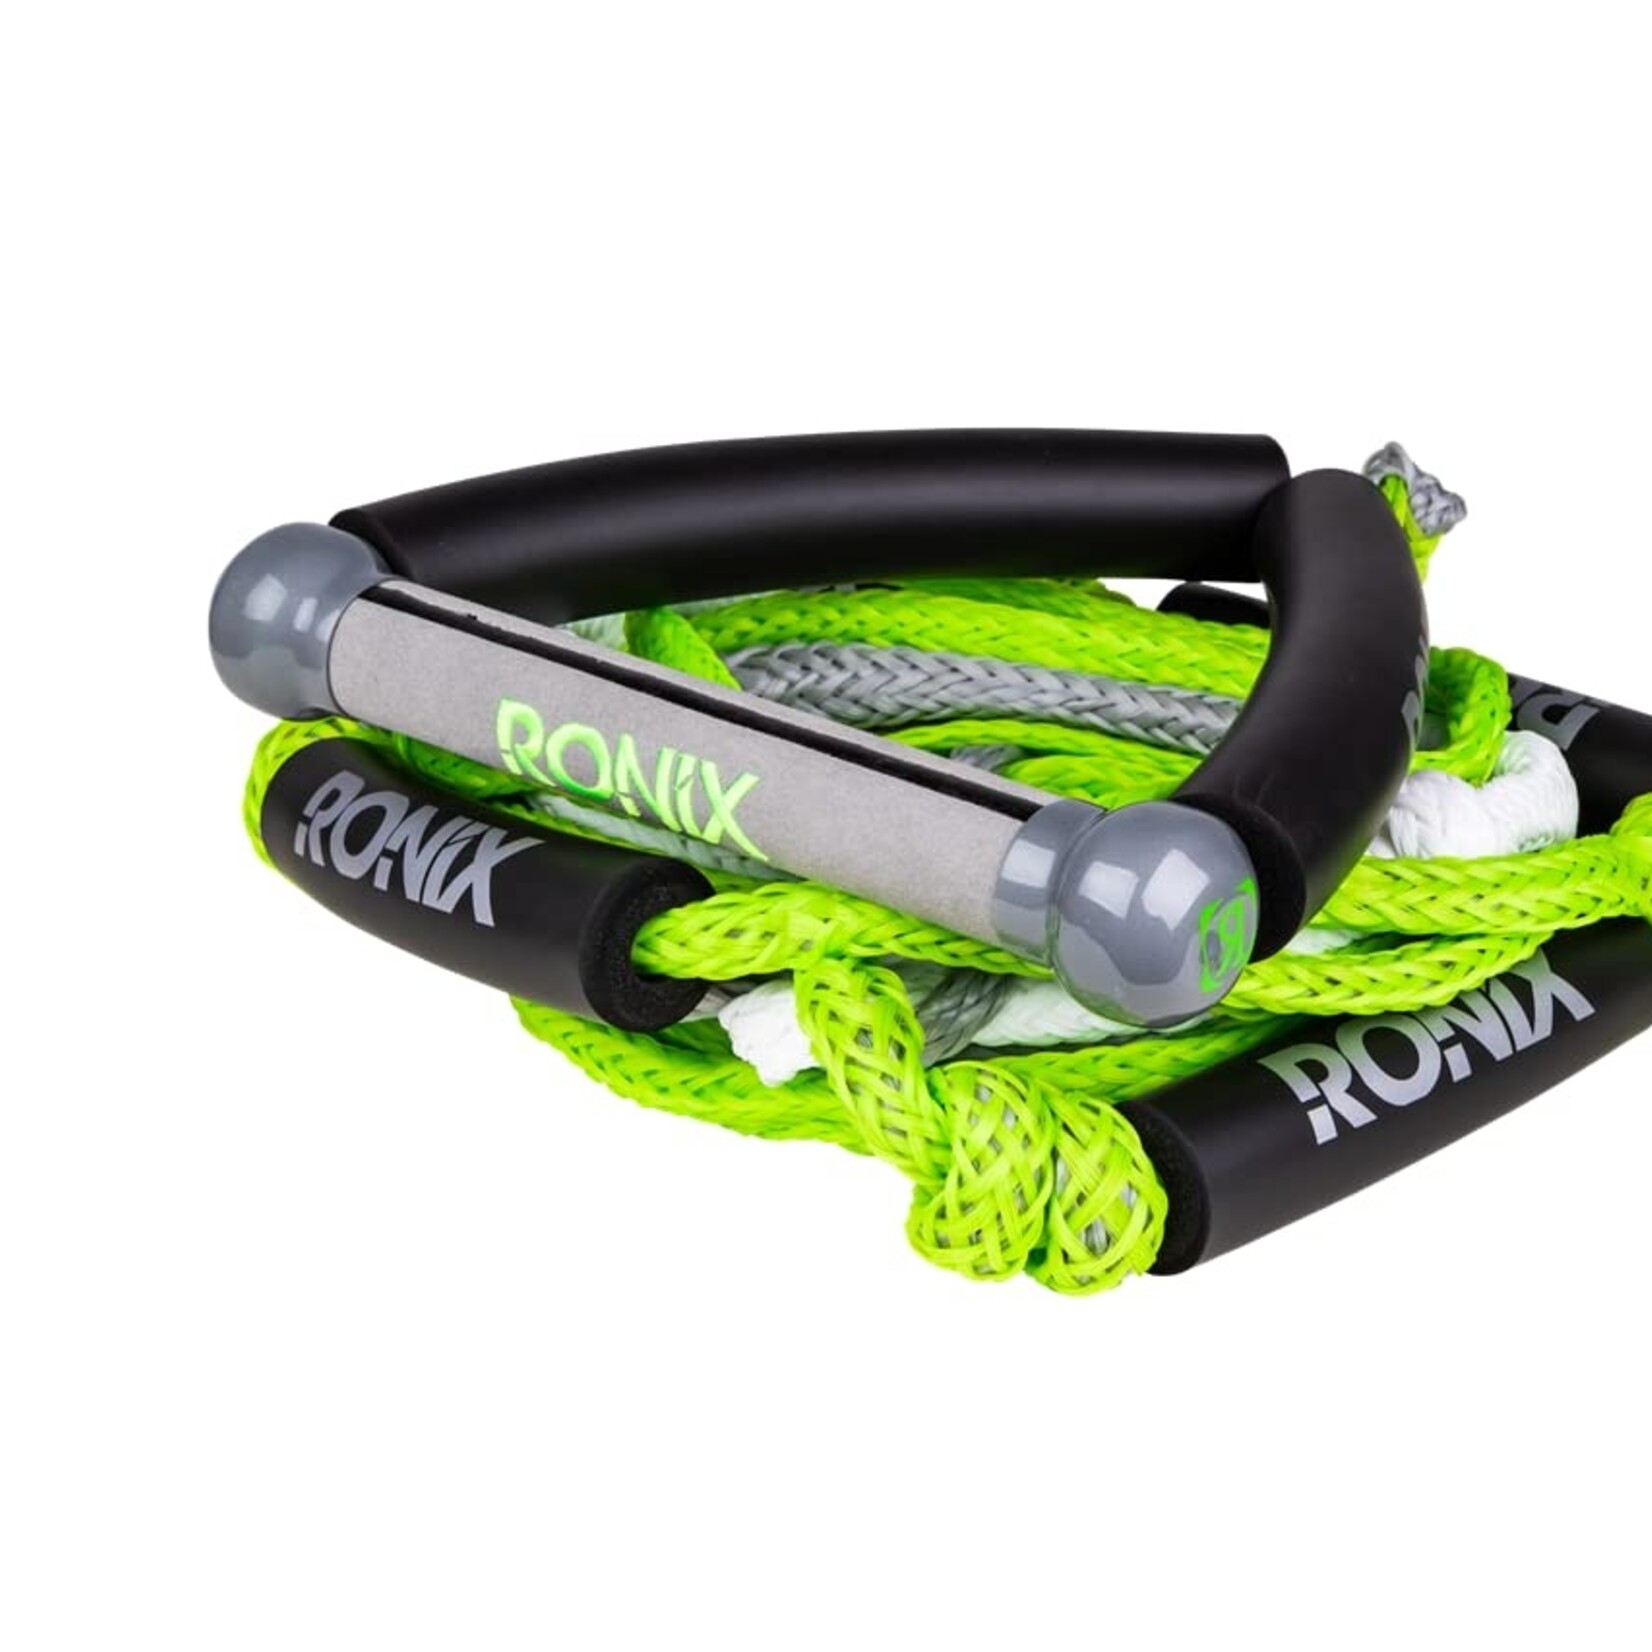 Radar Bungee surf rope 25’ 5 section